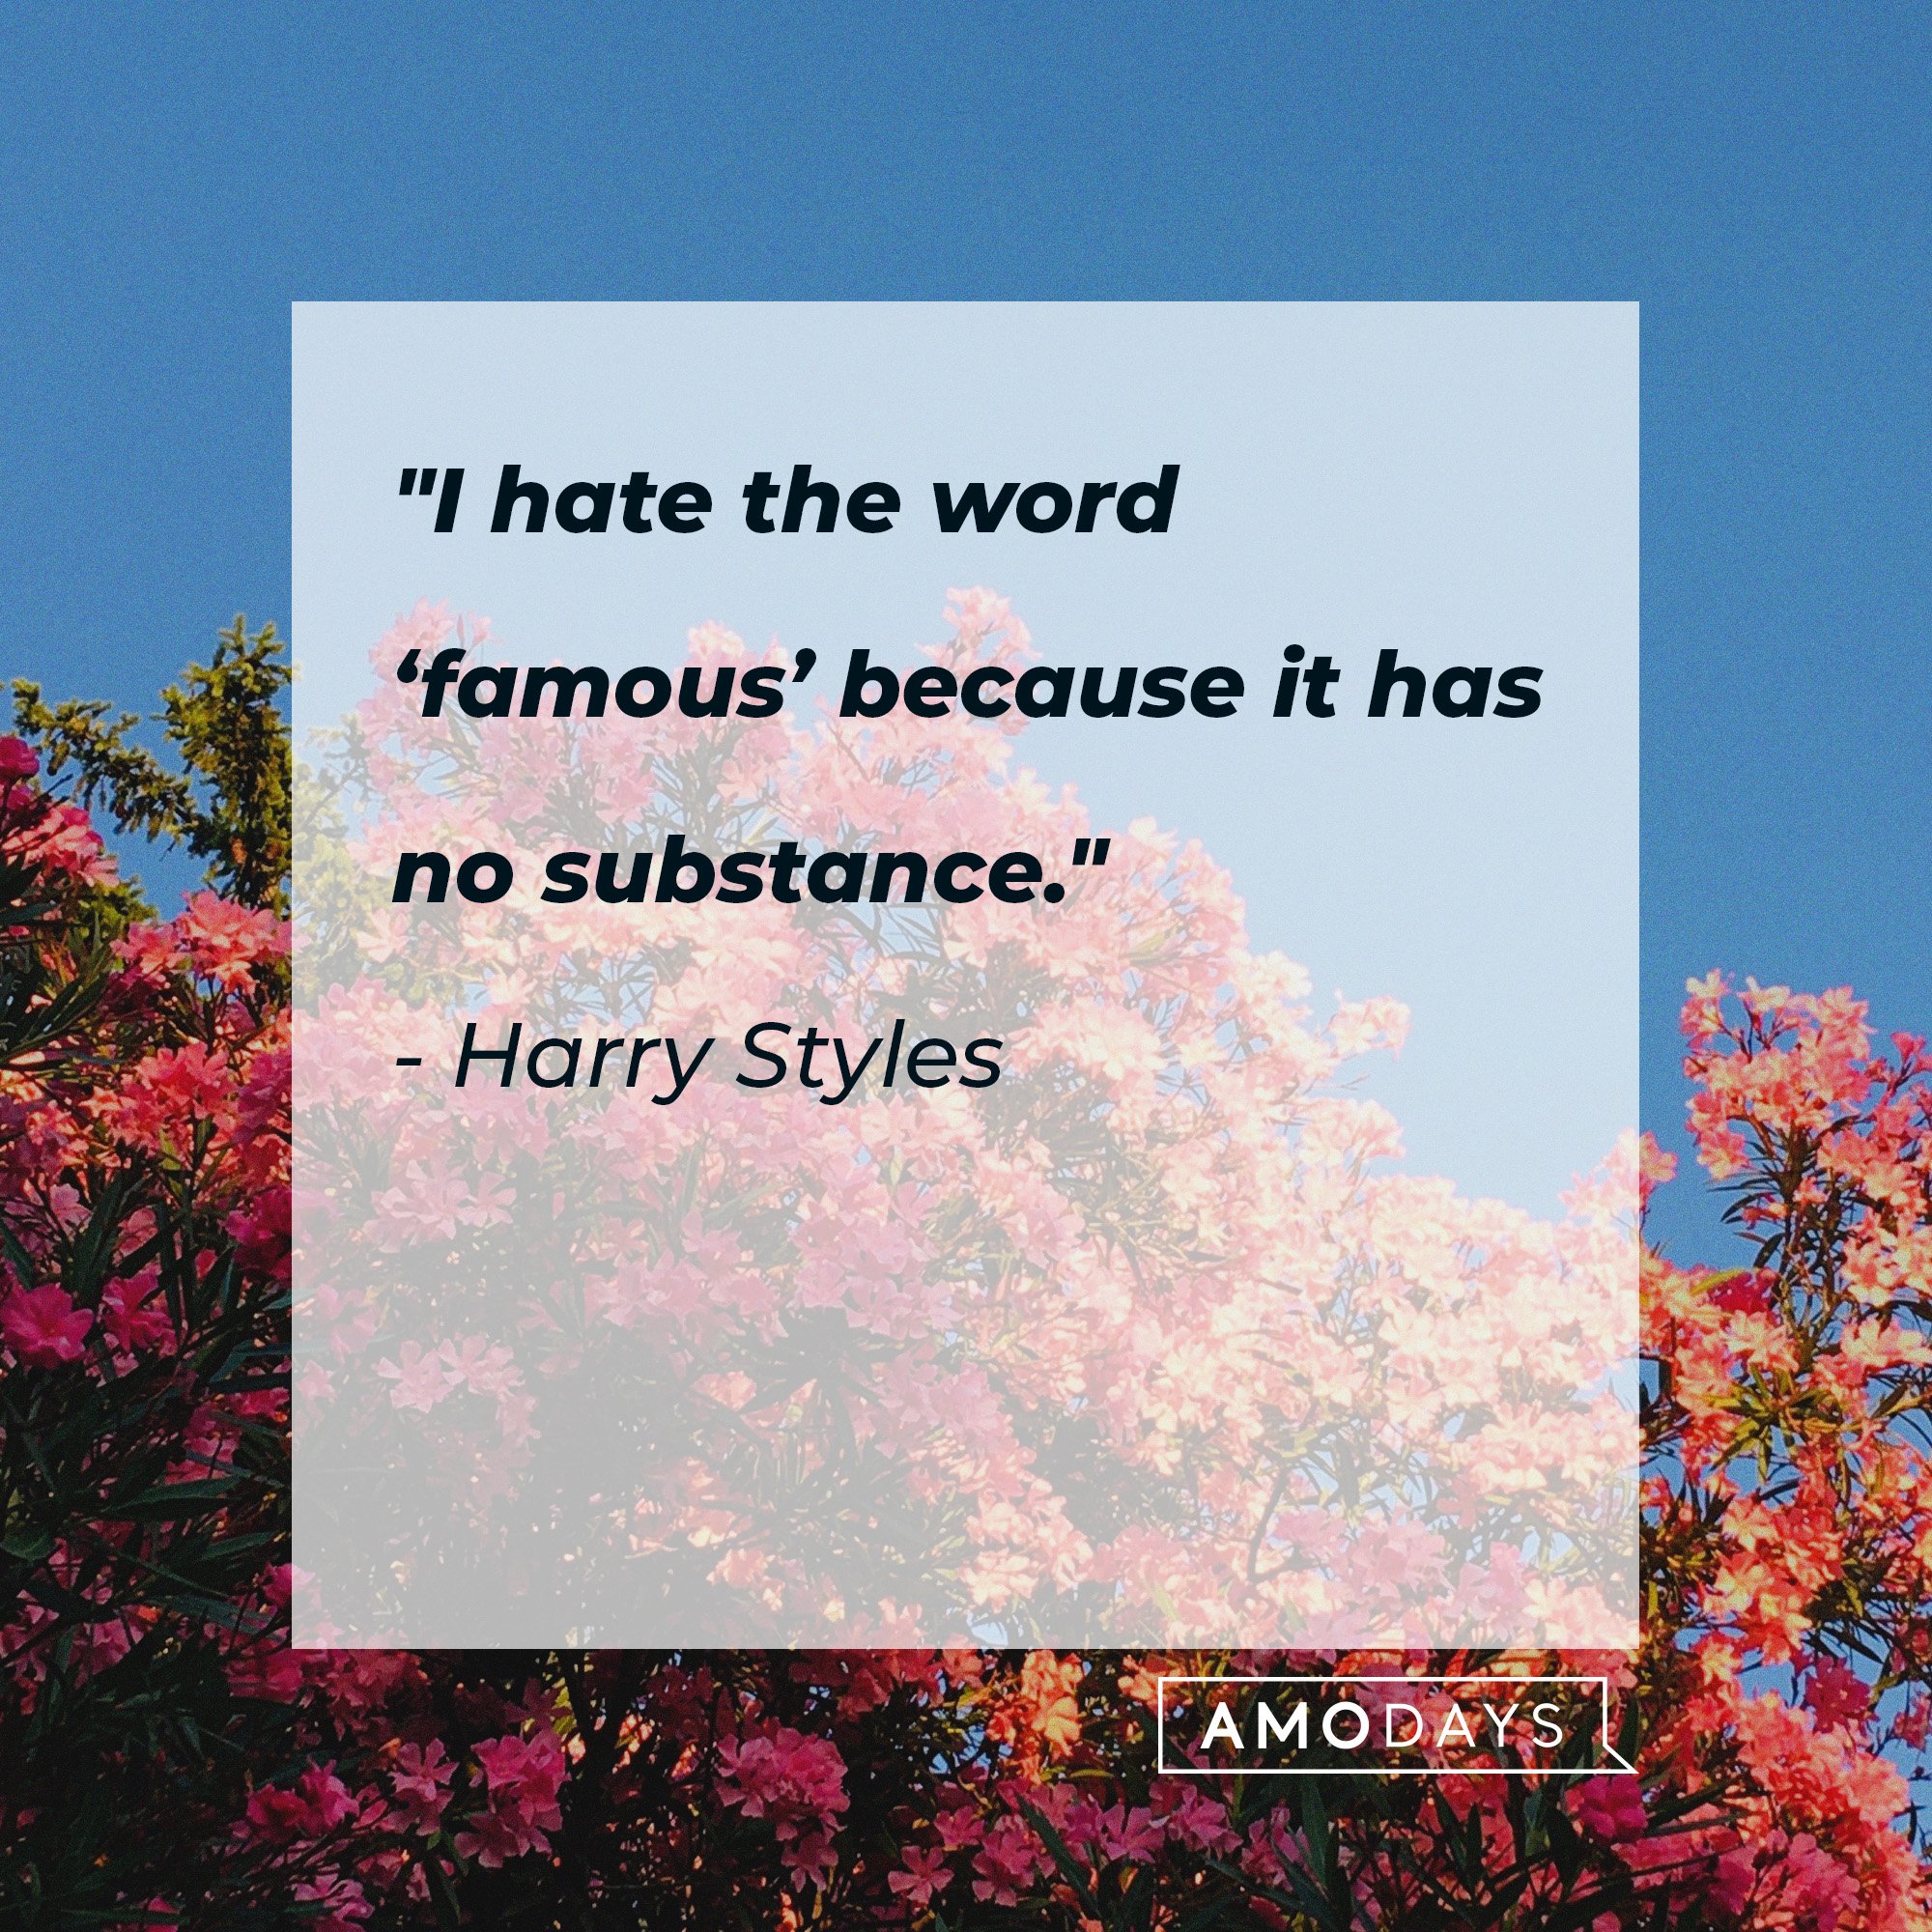 Harry Styles’ quote: "I hate the word famous because it has no substance."  |  Source: AmoDays